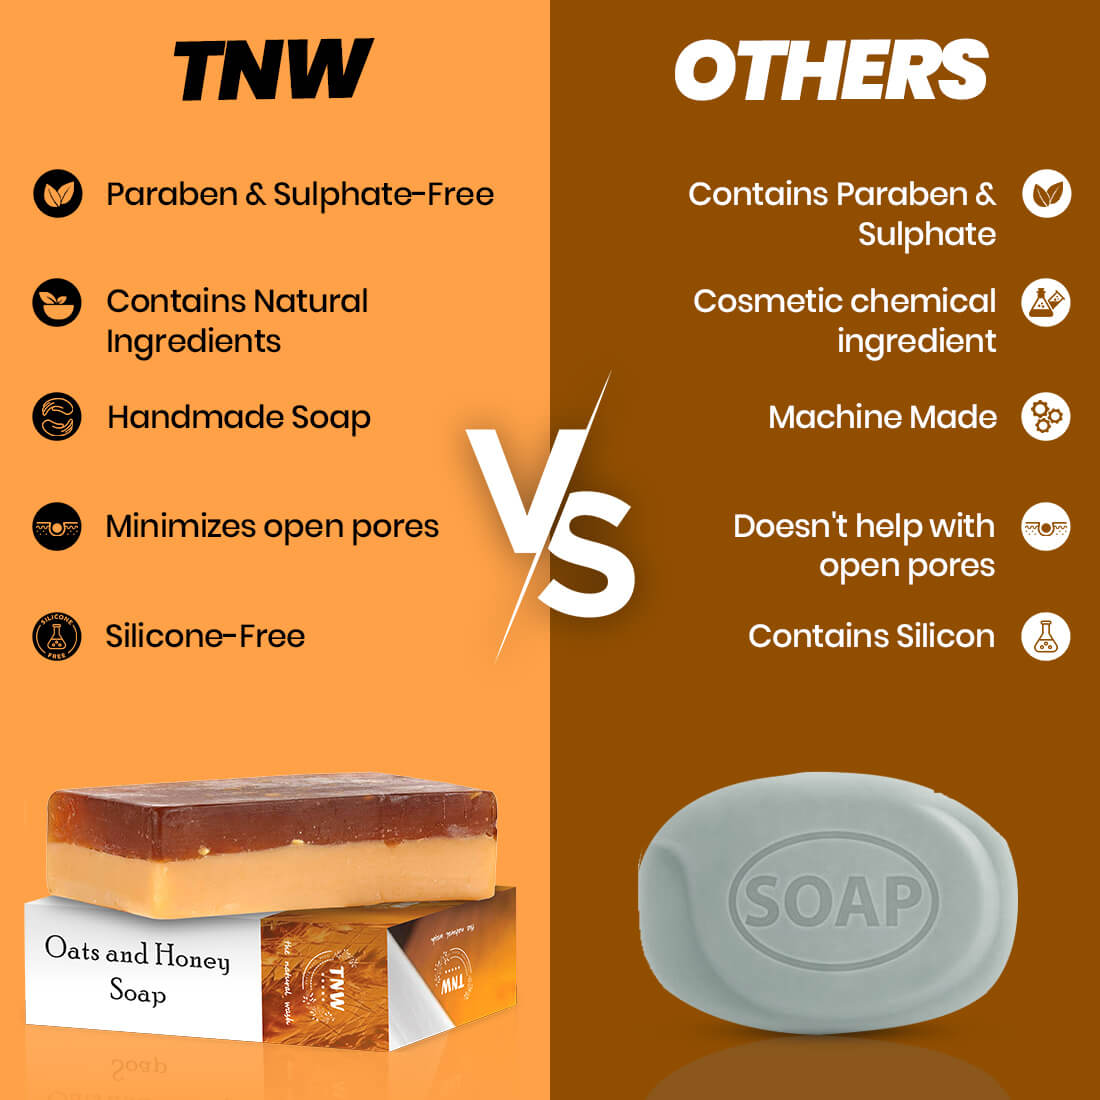 TNW Oats and Honey Soap vs Other Soap